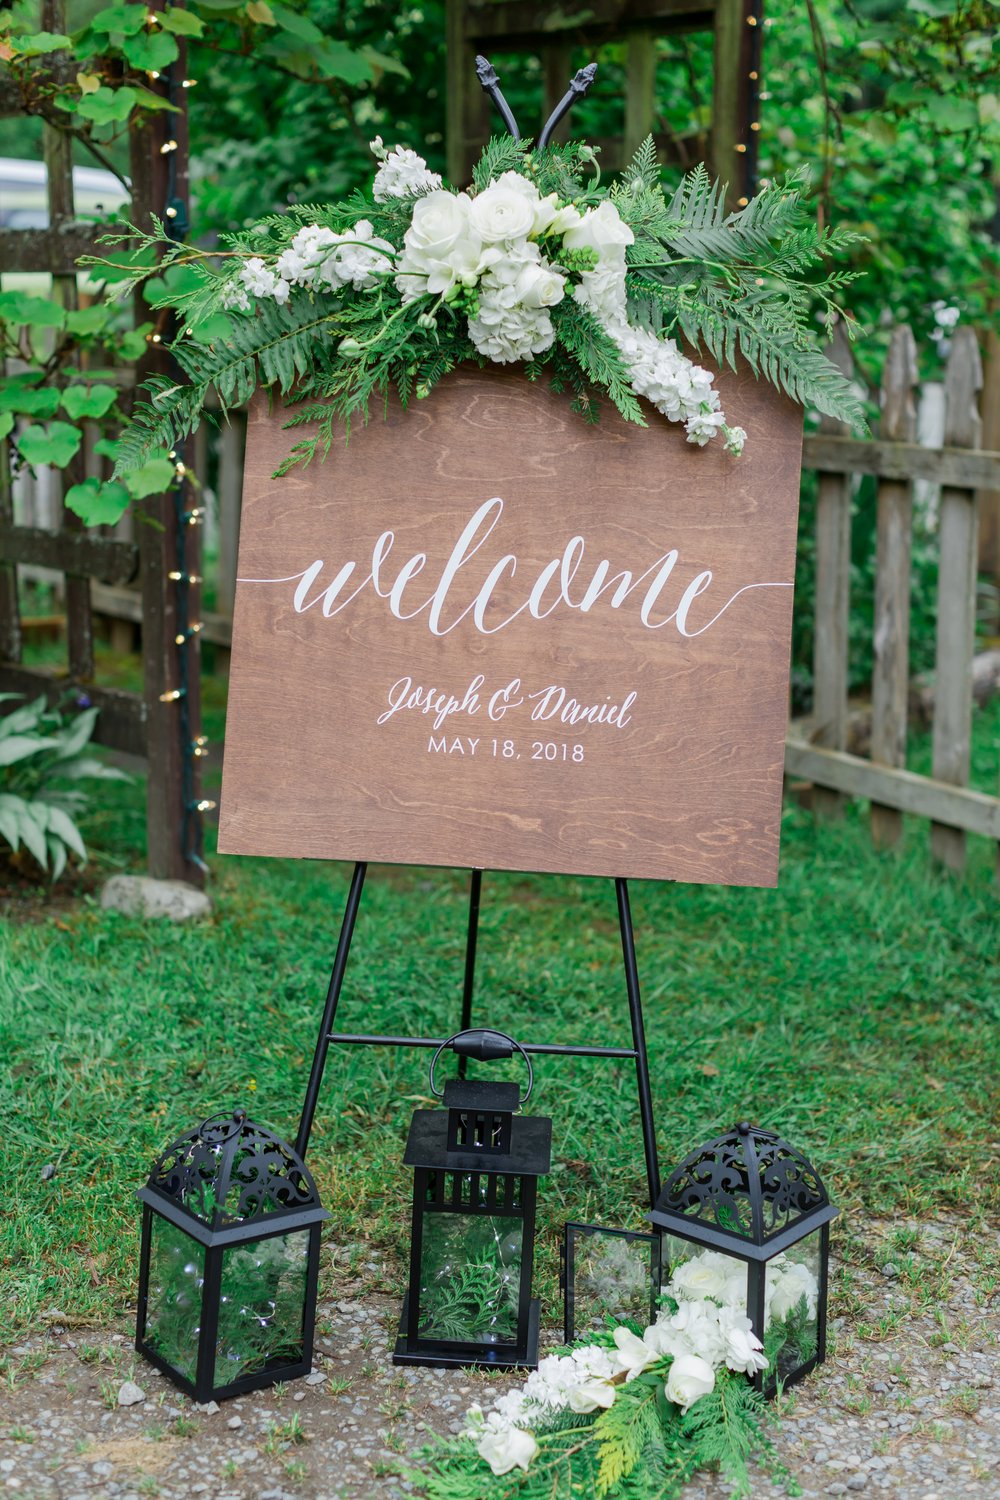  A wooden sign that reads “Welcome, Joseph and Daniel, May 18, 2018. 